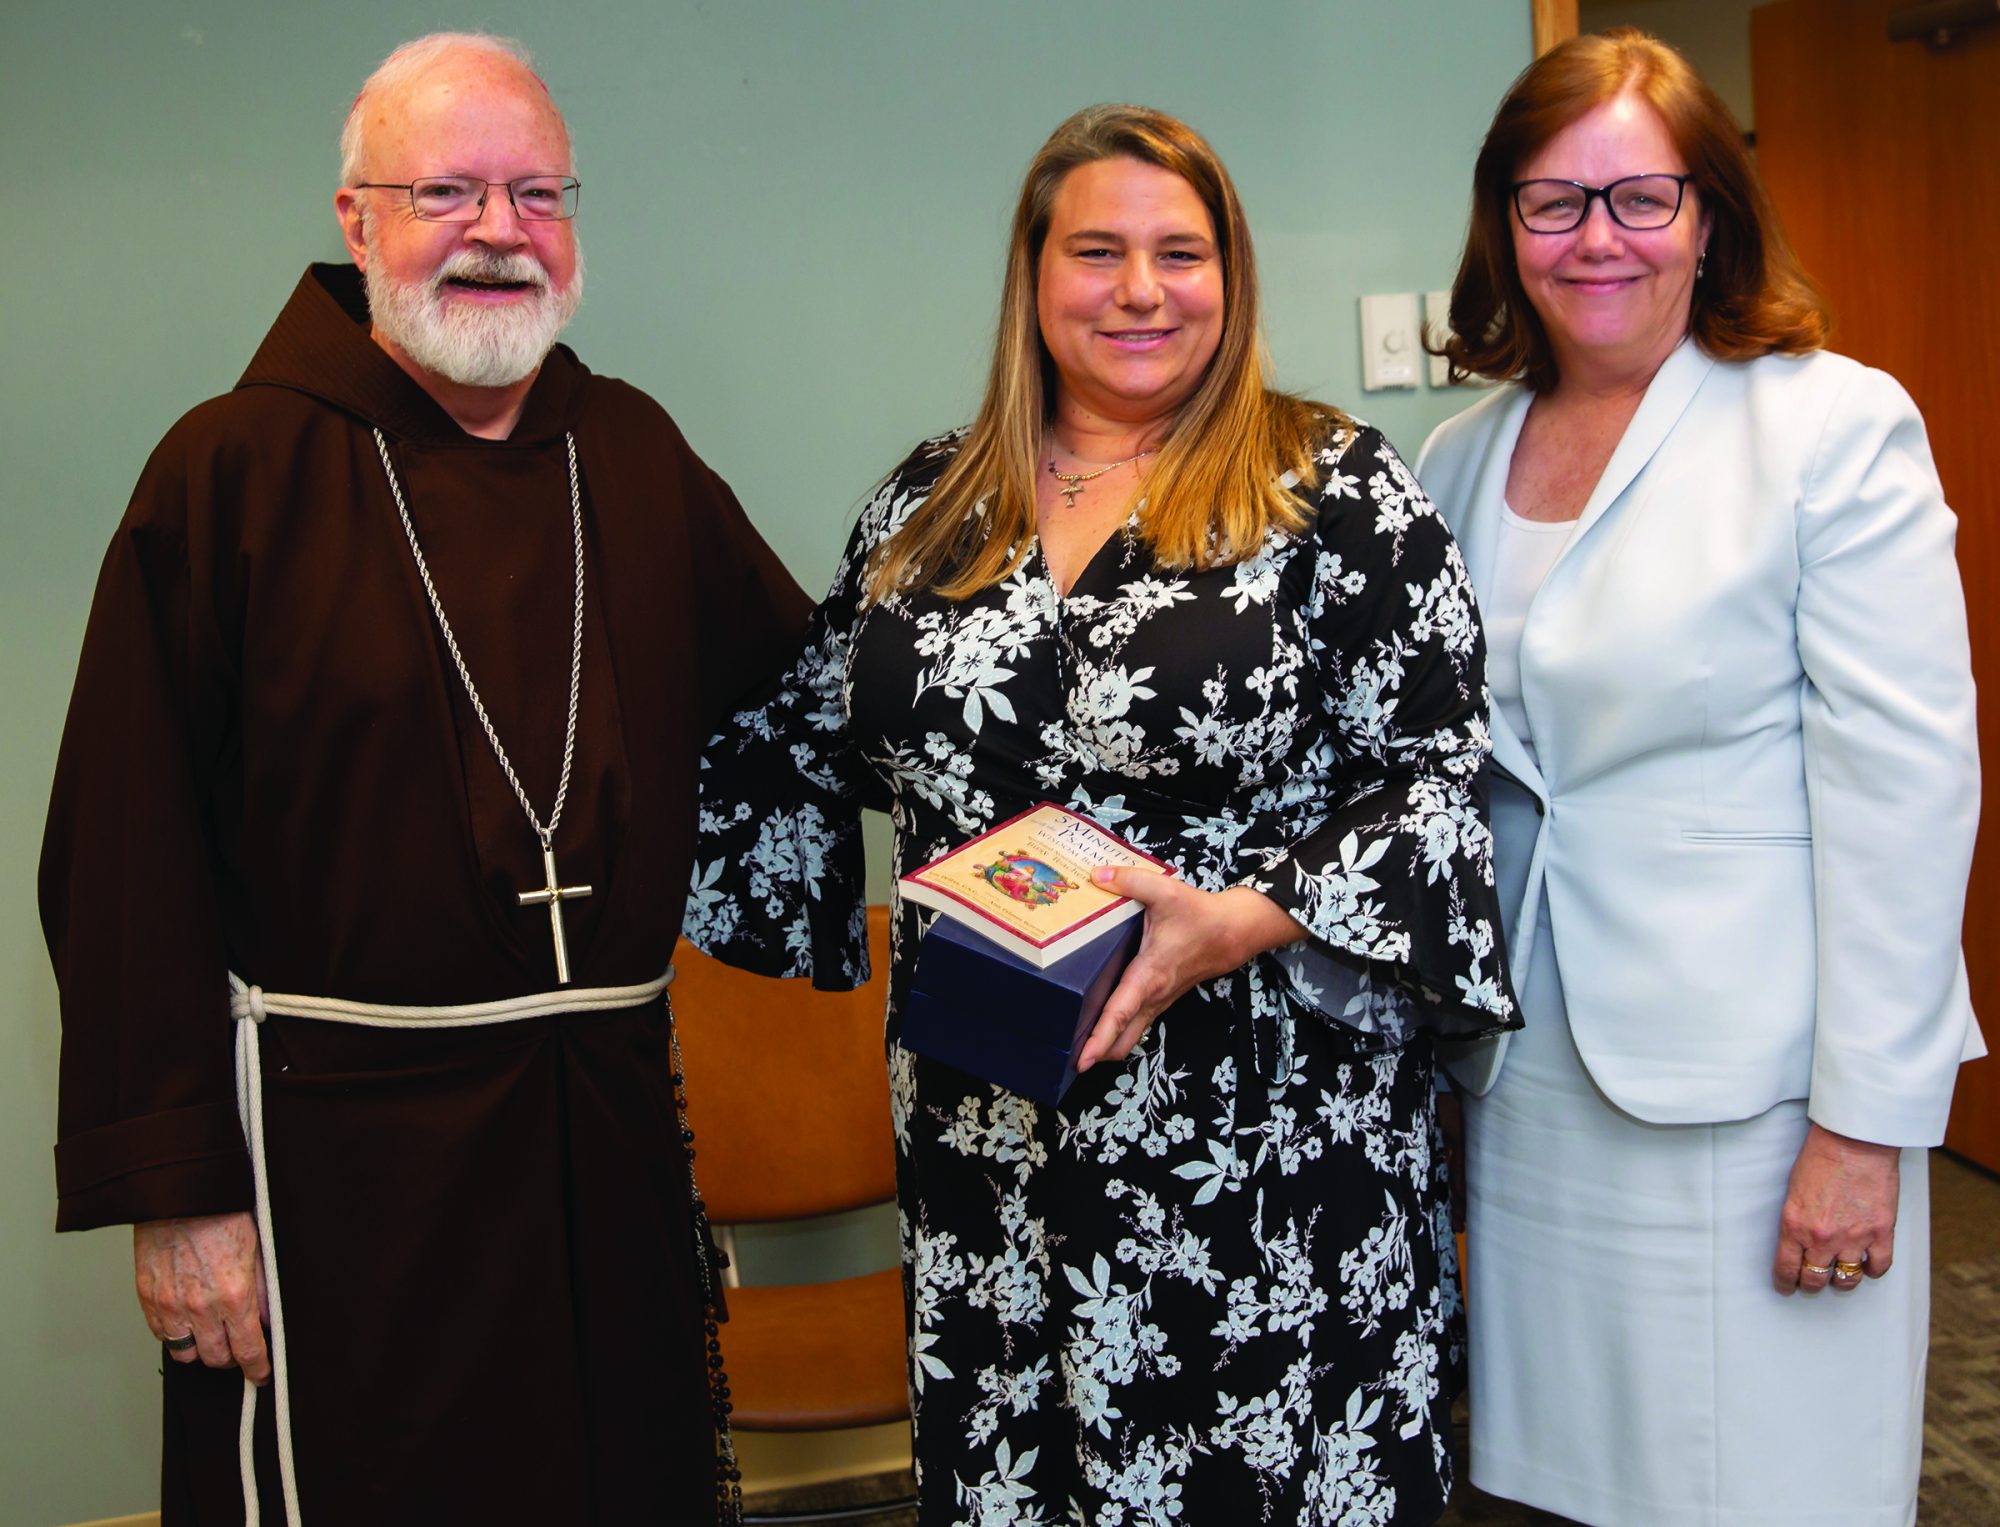 Andrea Alberti, center, with Cardinal Seán O’Malley and Kathy Mears, superintendent of the Archdiocese of Boston Catholic schools.